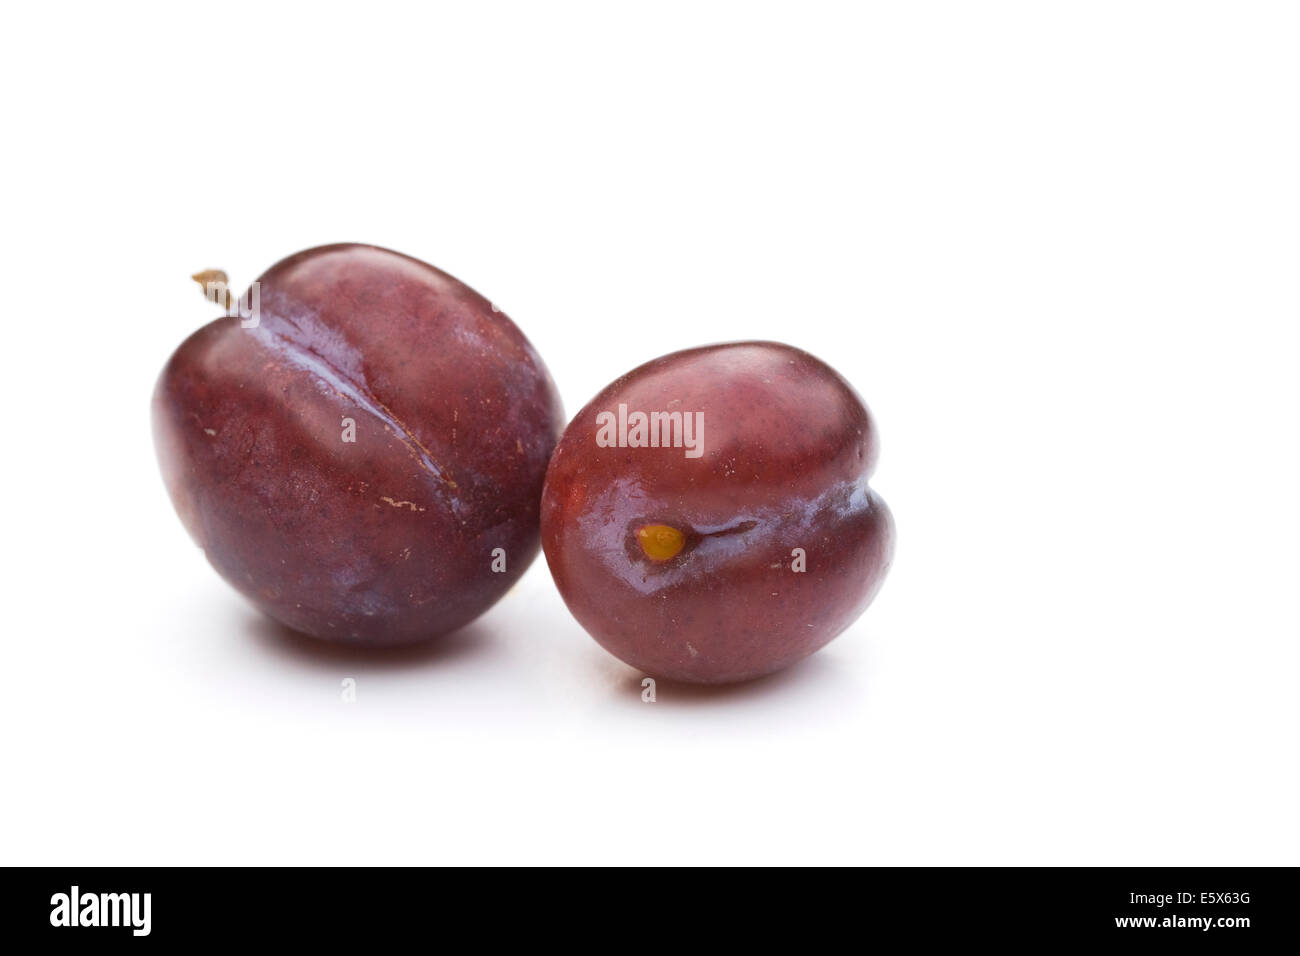 Two plums on a white background. Stock Photo